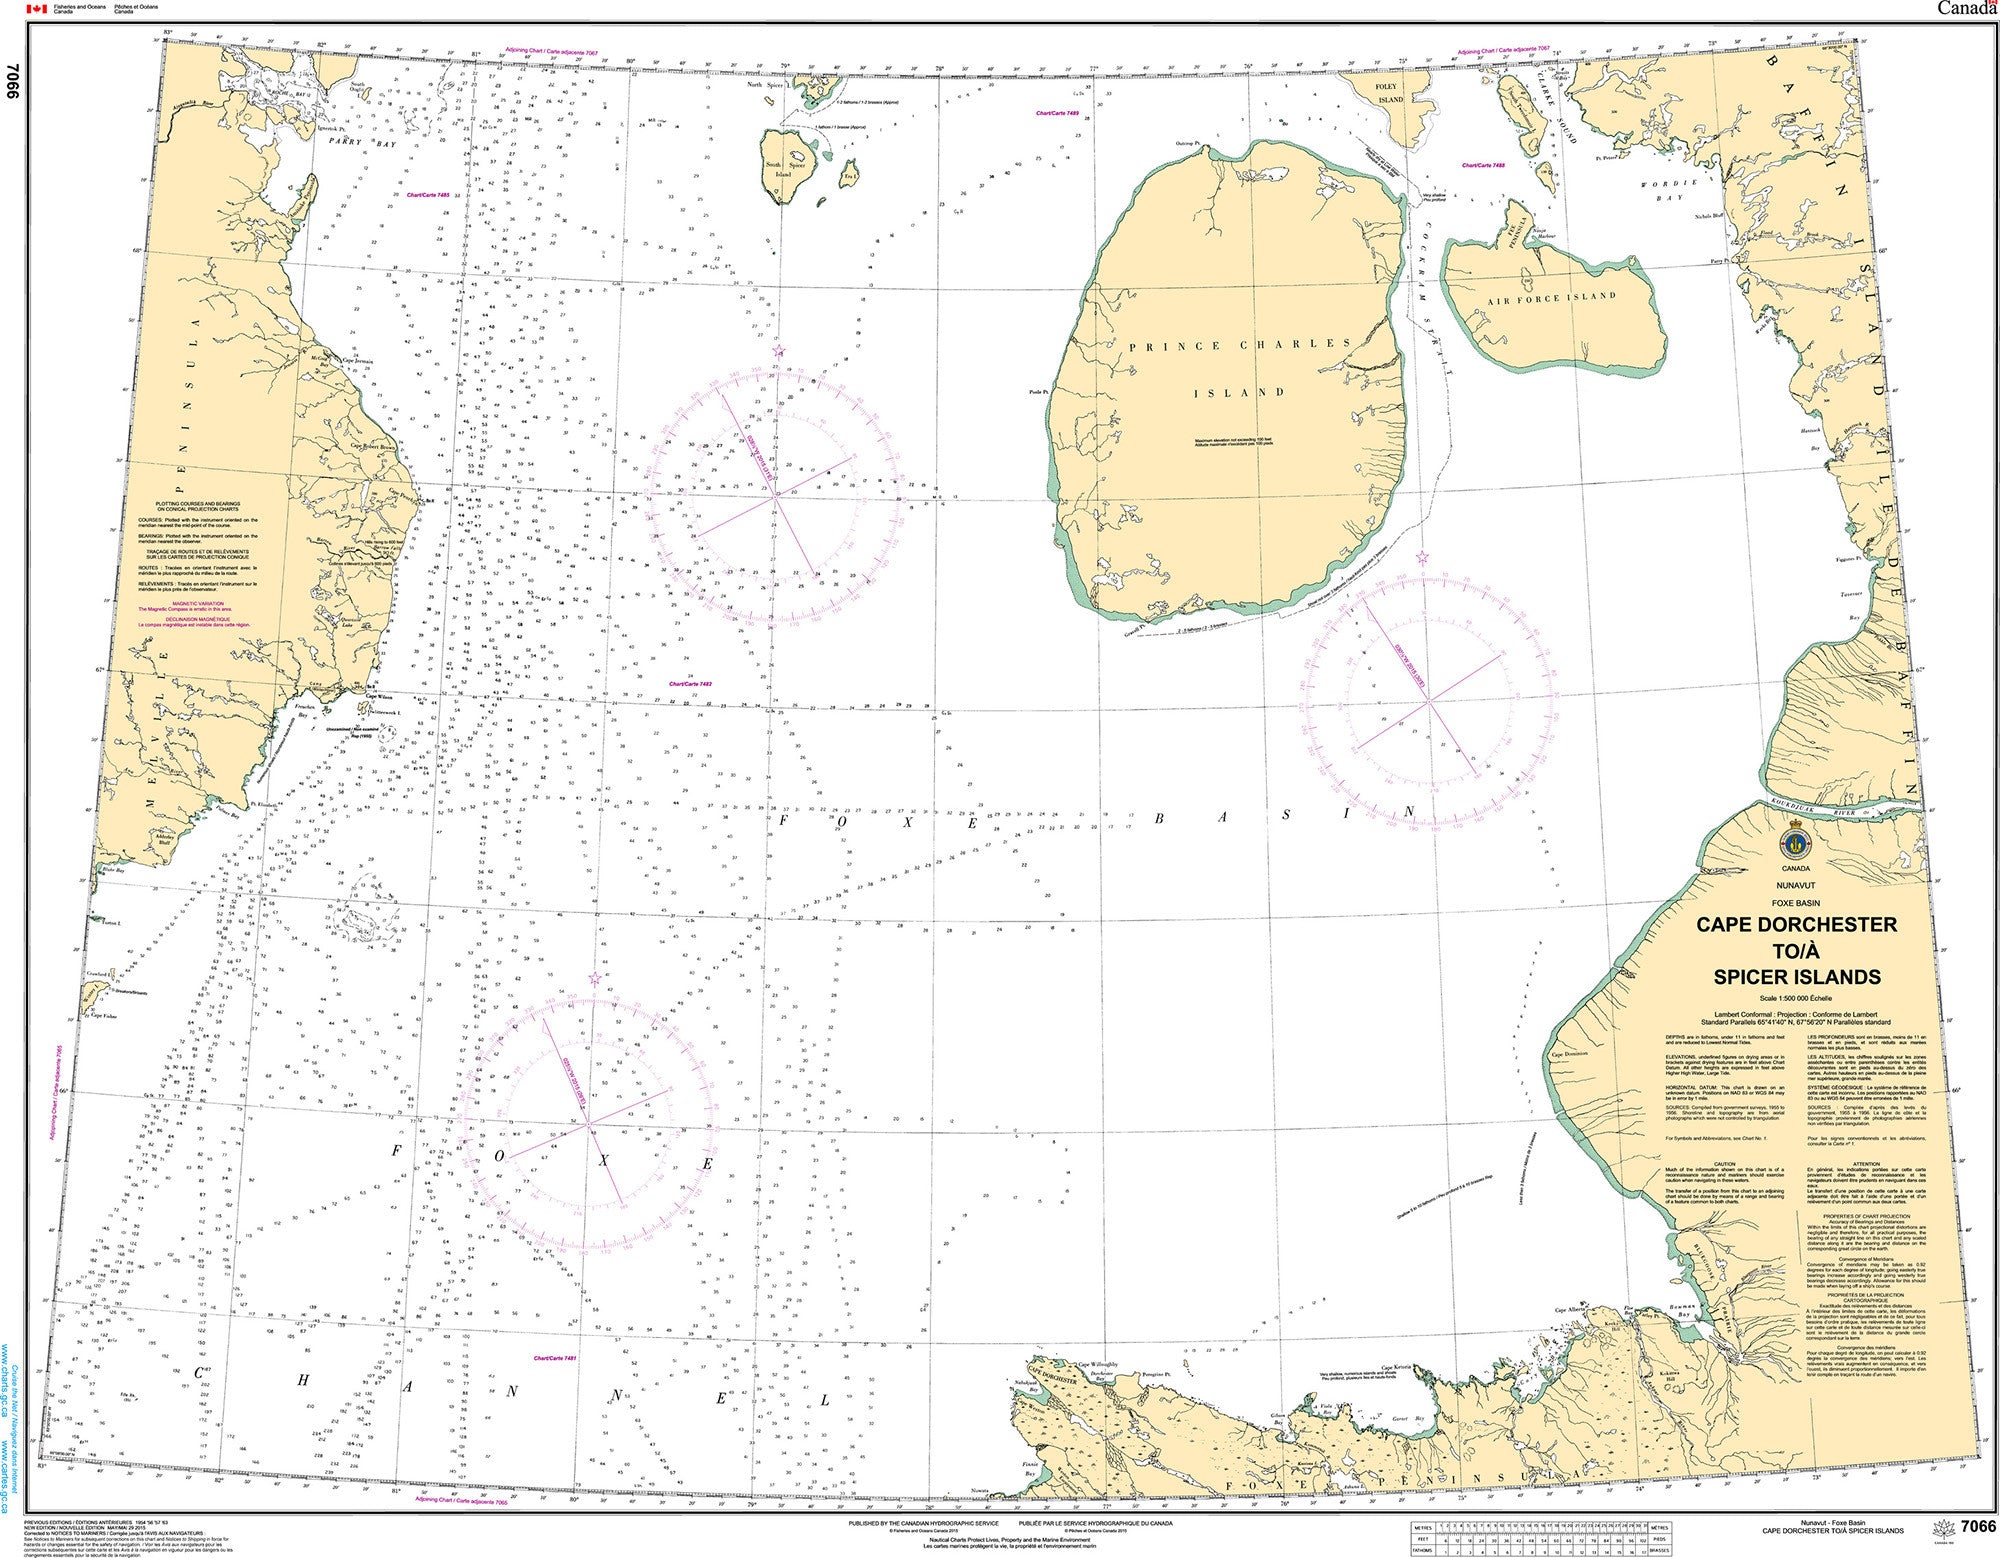 Canadian Hydrographic Service Nautical Chart CHS7066: Cape Dorchester to Spicer Islands